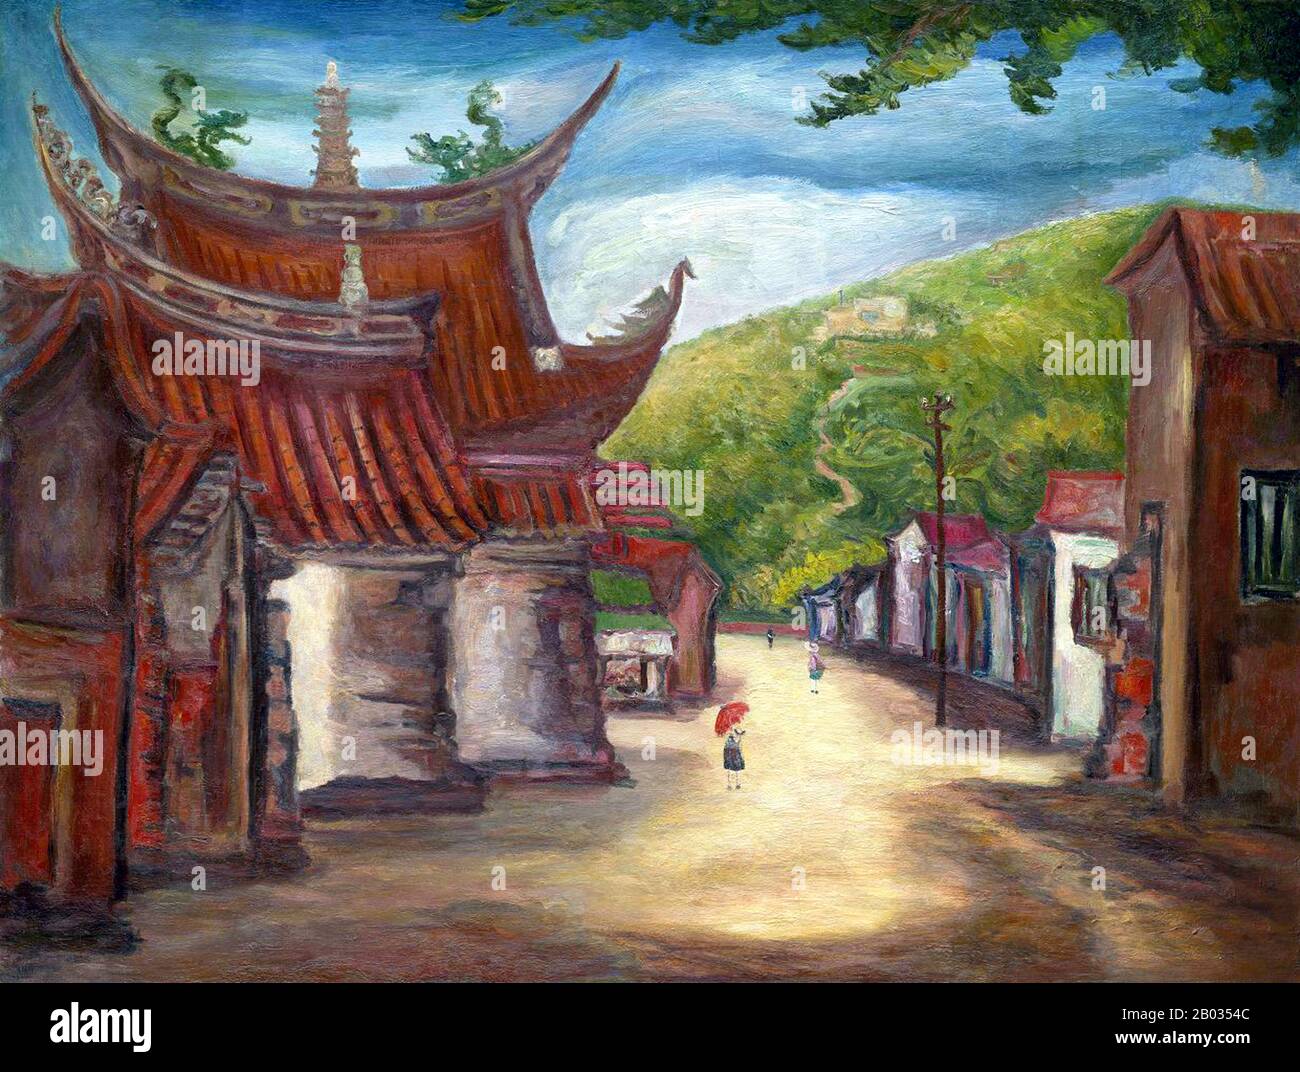 Tan Ting-pho (Chen Chengbo; Peh-oe-ji: Tan Teng-pho; February 2, 1895 – March 25, 1947), was a well-known Taiwanese painter. In 1926, his oil painting Street of Chiayi was featured in the seventh Empire Art Exhibition in Japan, which was the first time a Taiwanese artist's work was displayed at the exhibition.  Tan devoted his life to education and creation, and was greatly concerned about the development of humanist culture in Taiwan. He was not only devoted to the improvement of his own painting, but also to the promotion of the aesthetic education of the Taiwanese people. He was murdered as Stock Photo